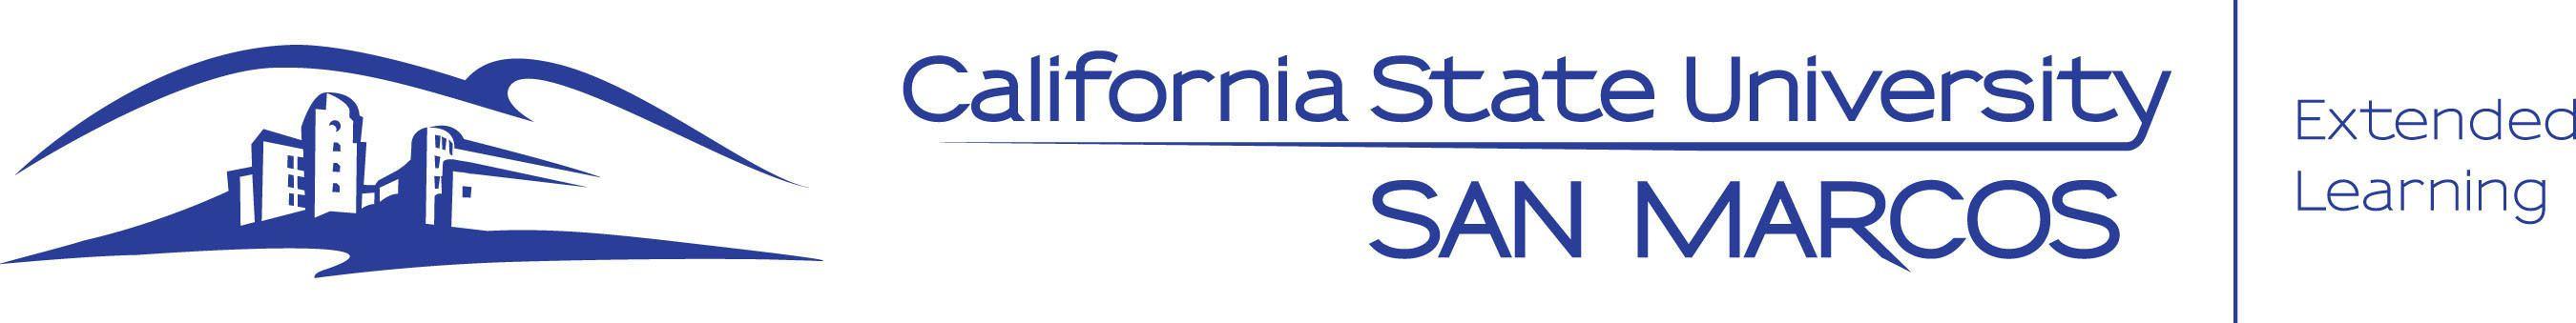 CSUSM Logo - California State University San Marcos Extended Learning Appoints ...